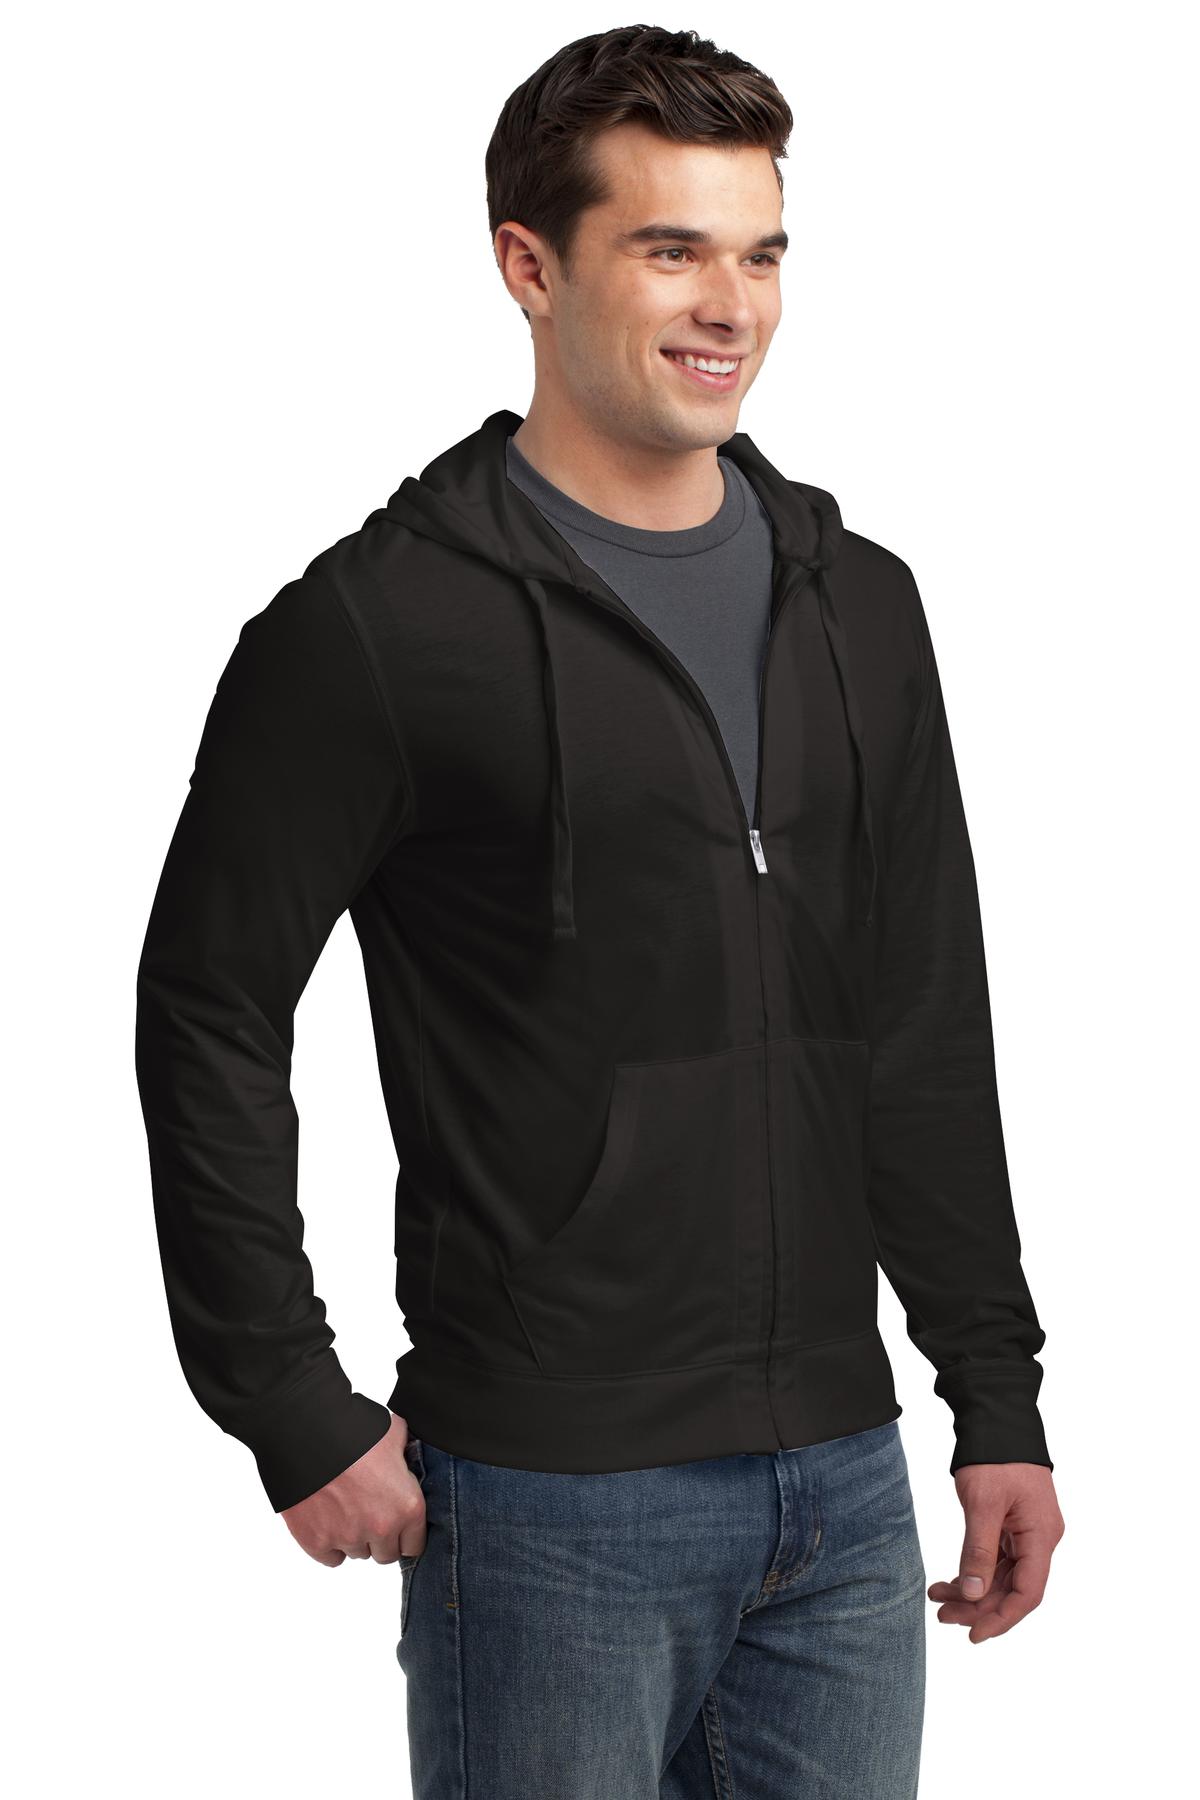 District Young Mens Jersey Full Zip Hoodie-3XL (Black) - image 4 of 6